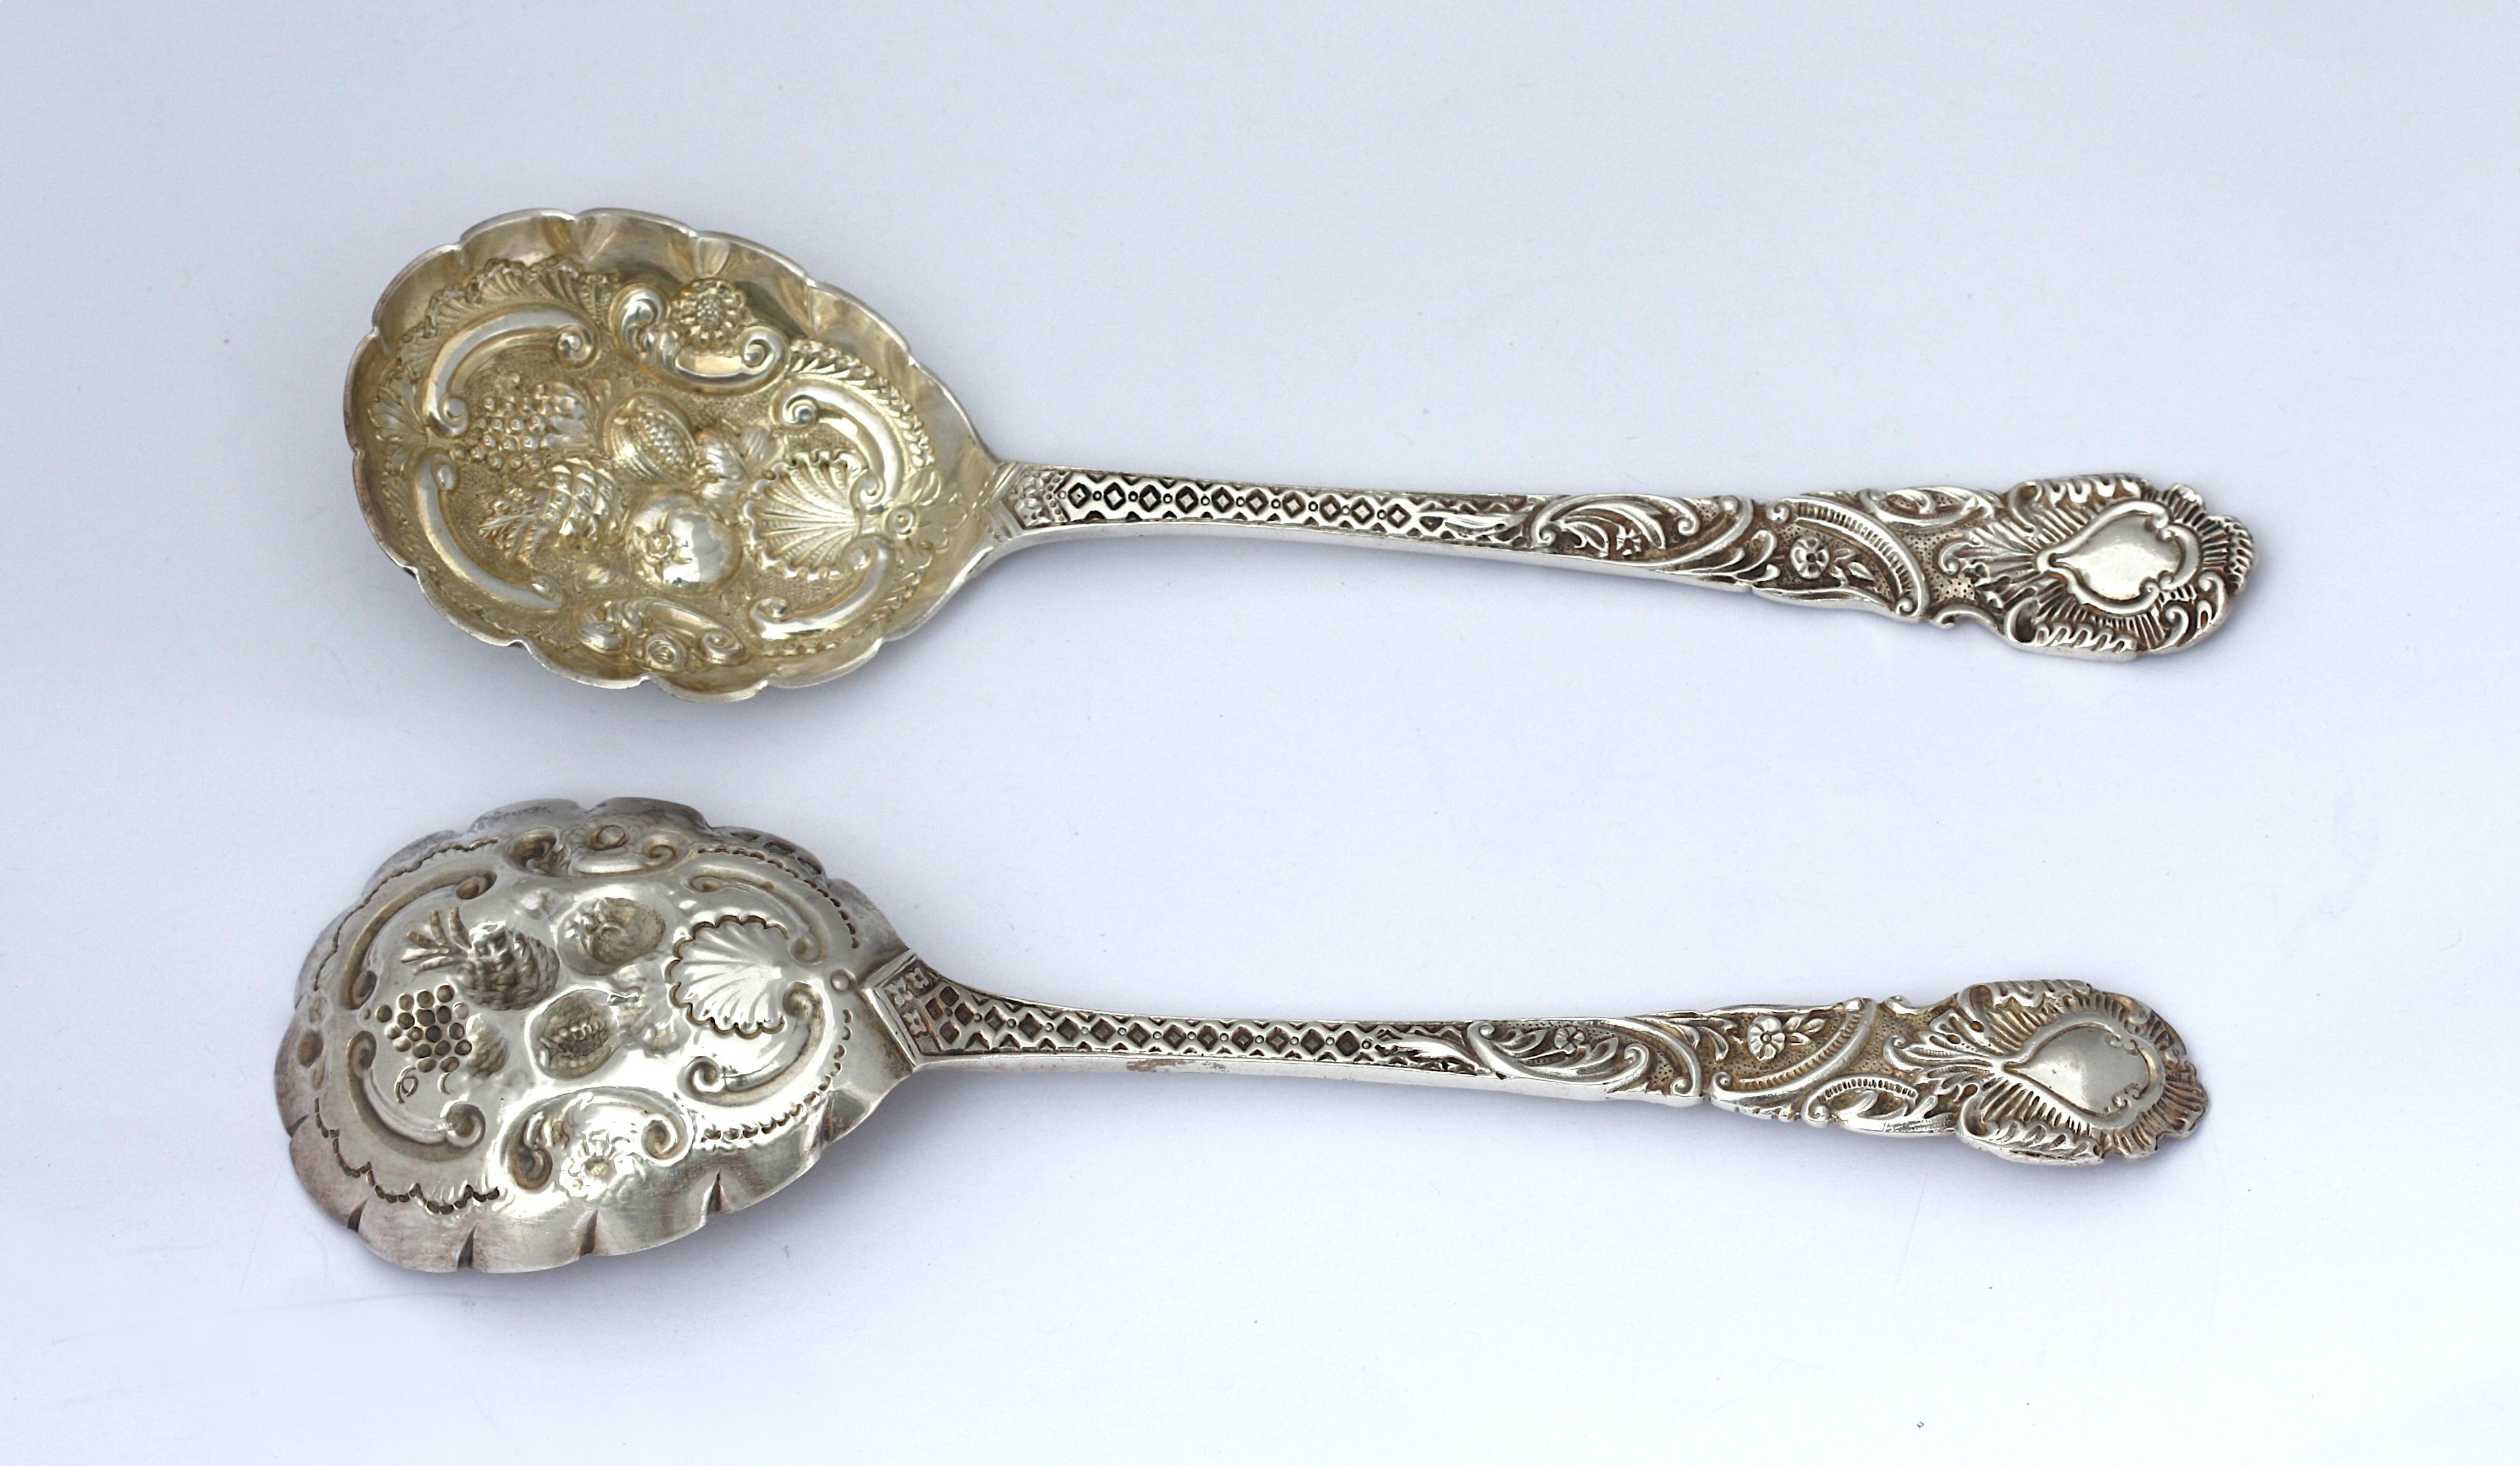 
Pair of Victorian Silver Berry Spoons
English, 1865. In a rococo style, the scoops with repose scrolls, a shell, and fruit. 6.5 ozt.
